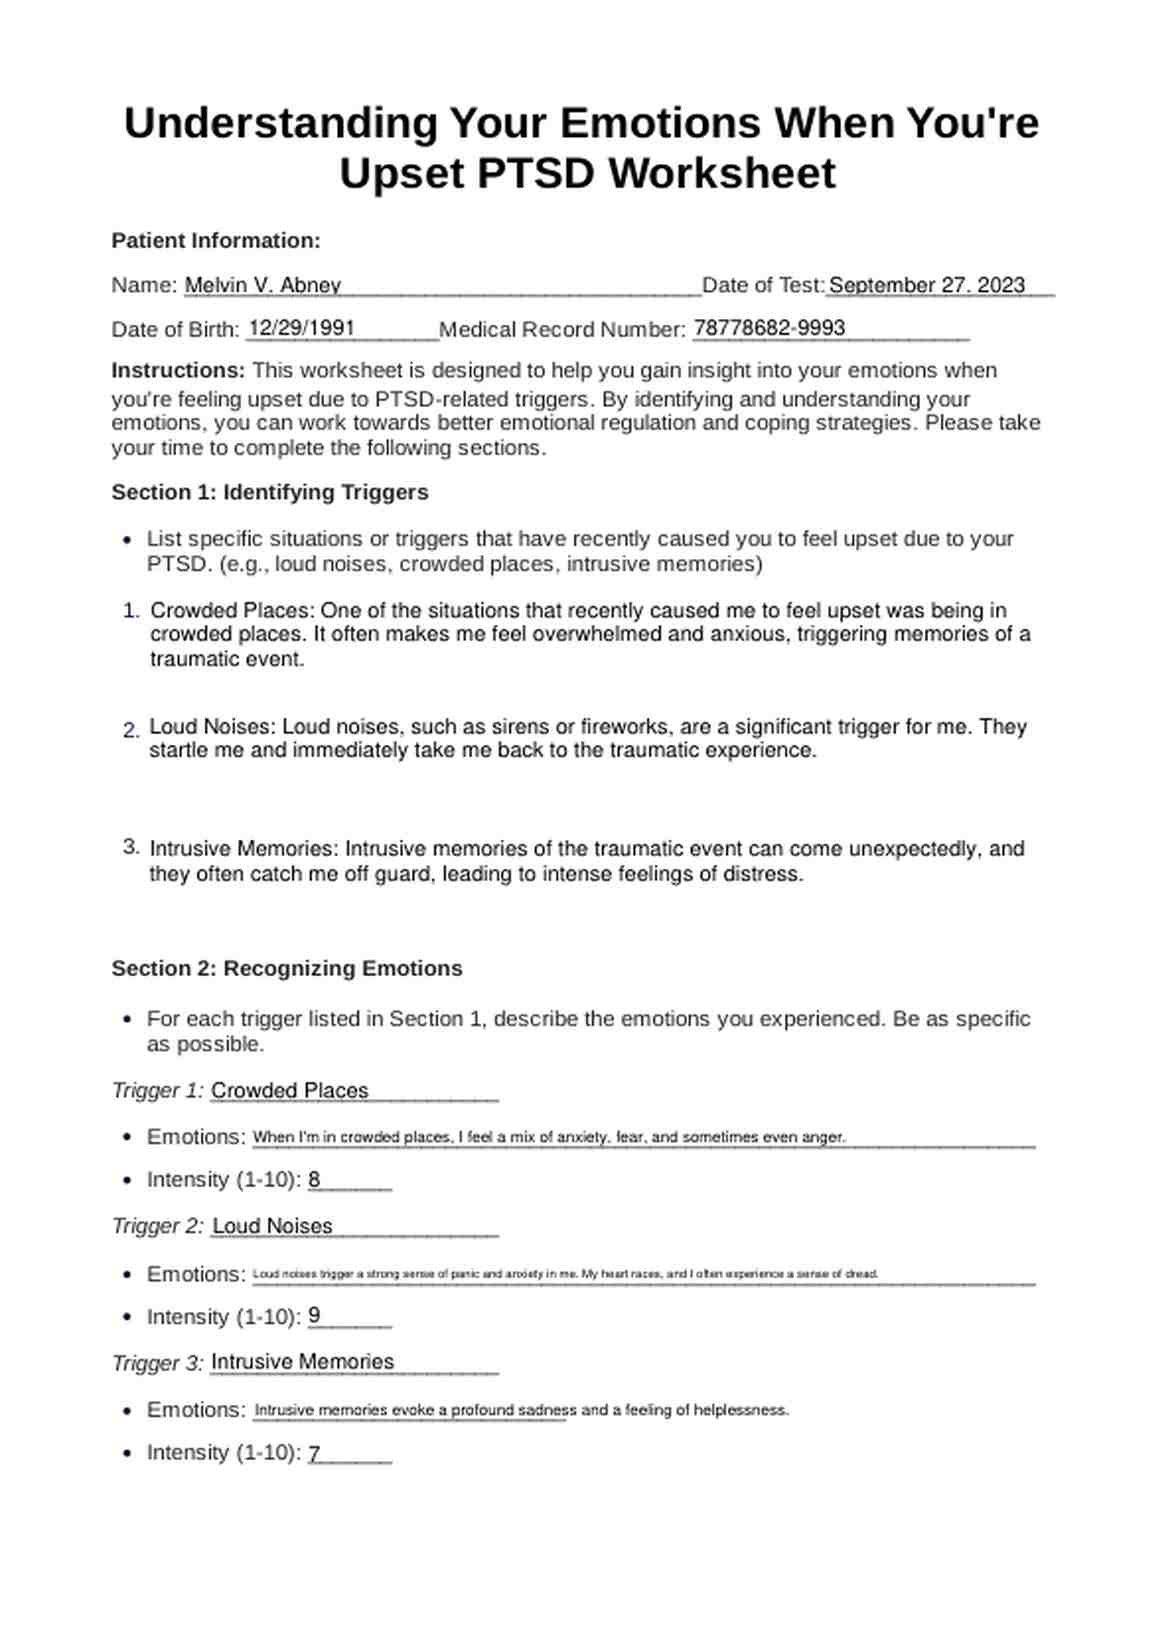 Understanding Your Emotions When You're Upset PTSD Worksheet PDF Example